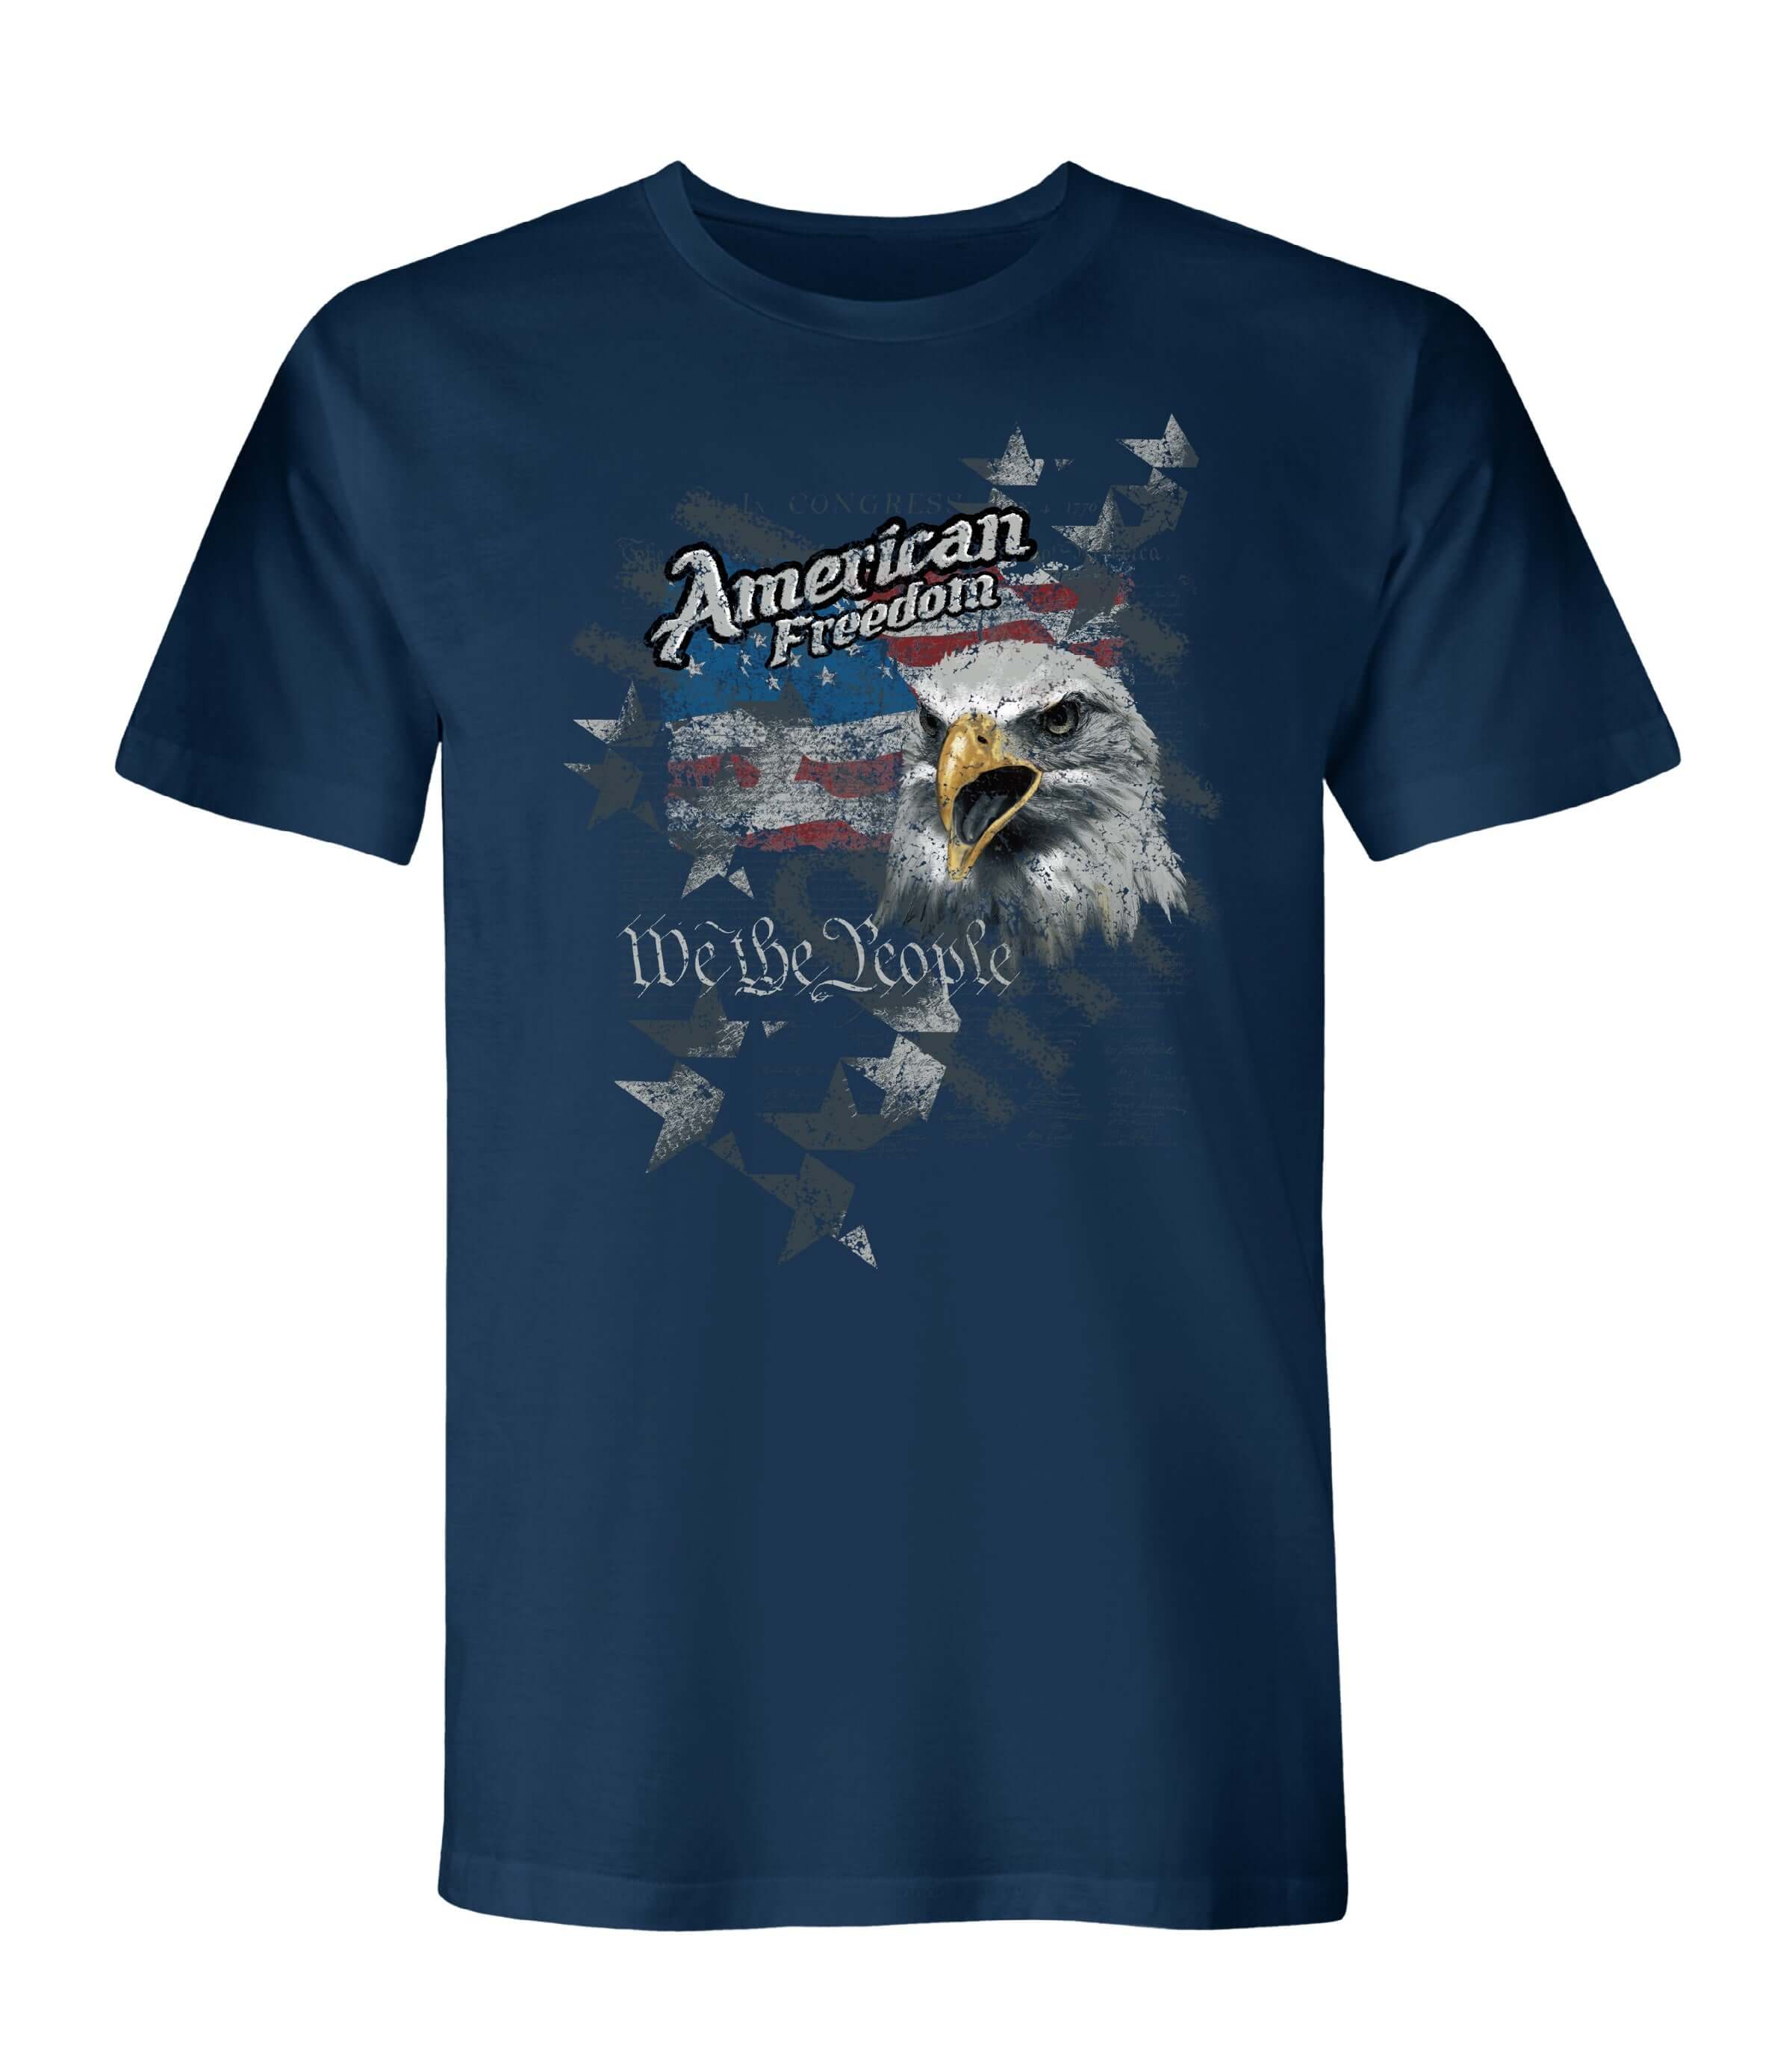 Collaged American Freedom USA Made Short Sleeve Tee -The Flag Shirt